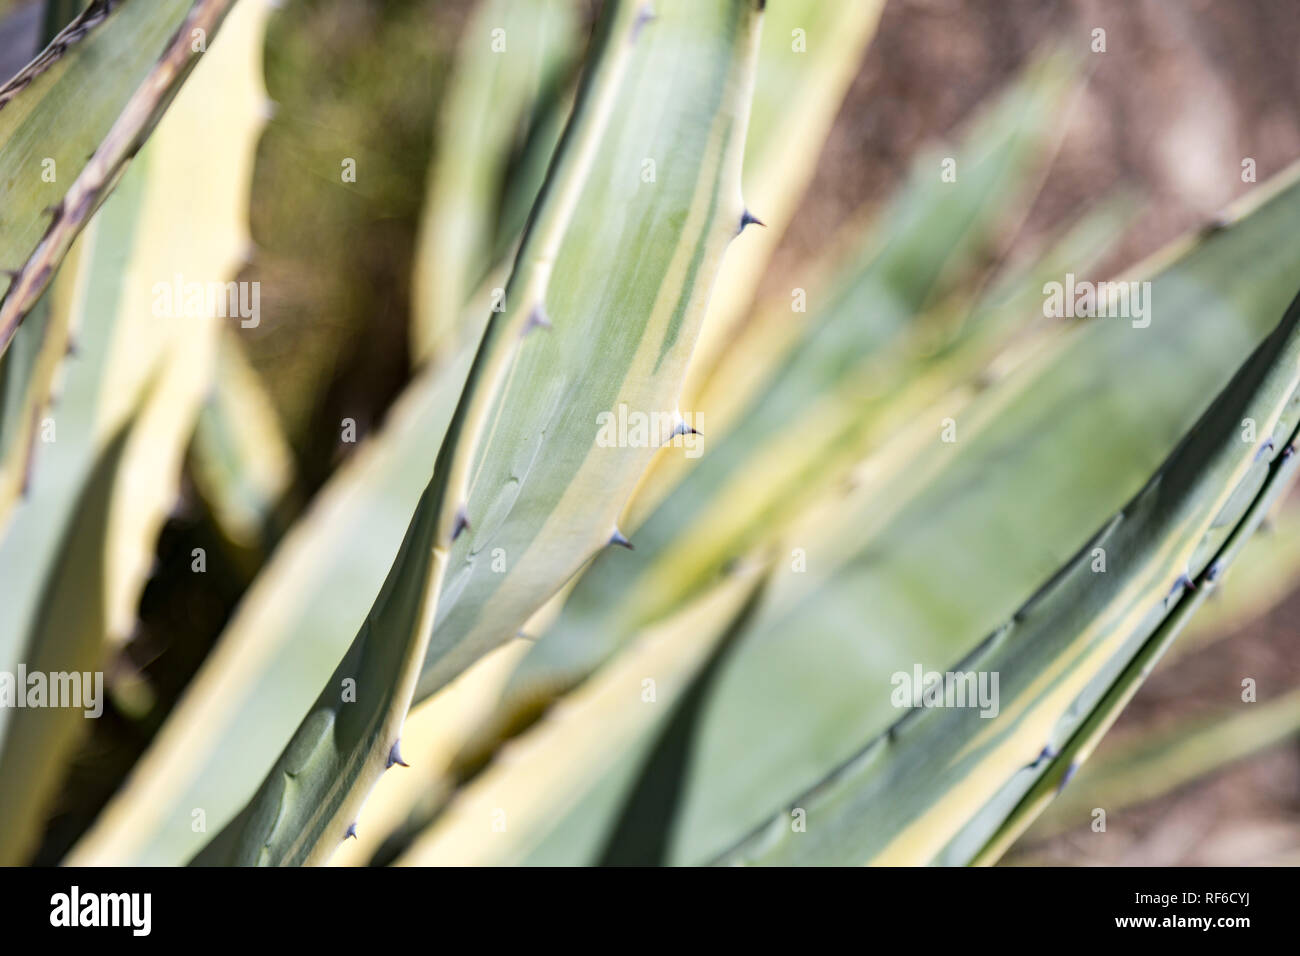 Thorny agave in a garden in Castelnou, South France Stock Photo